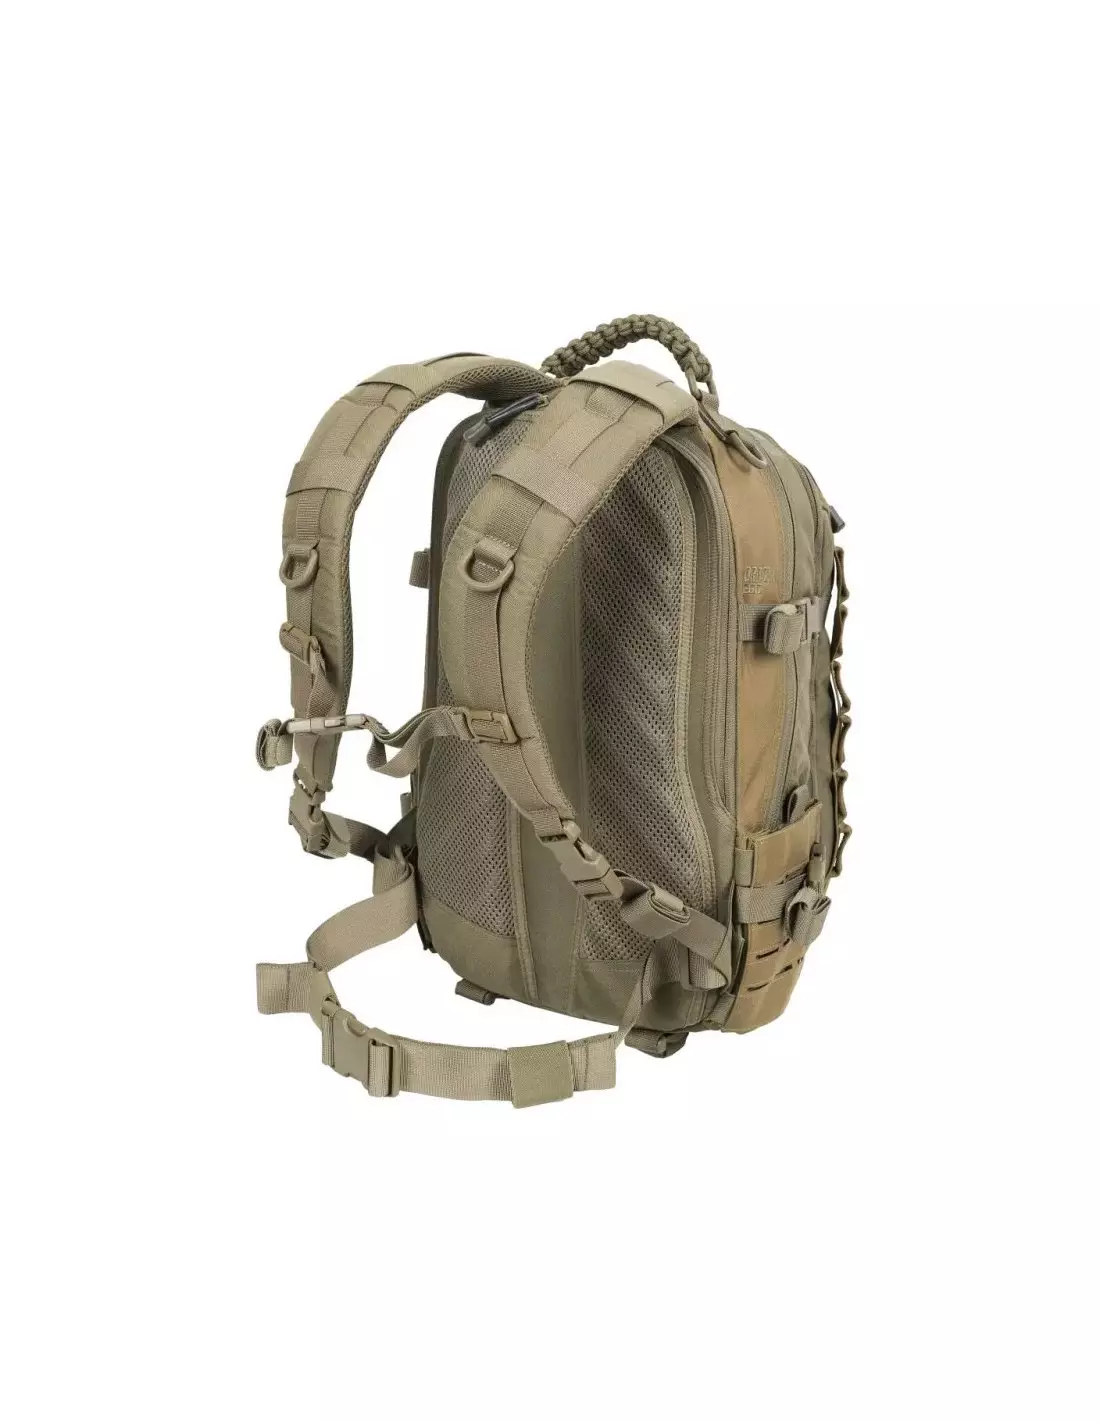 Direct Action Dragon Egg Tactical Backpack : : Bags